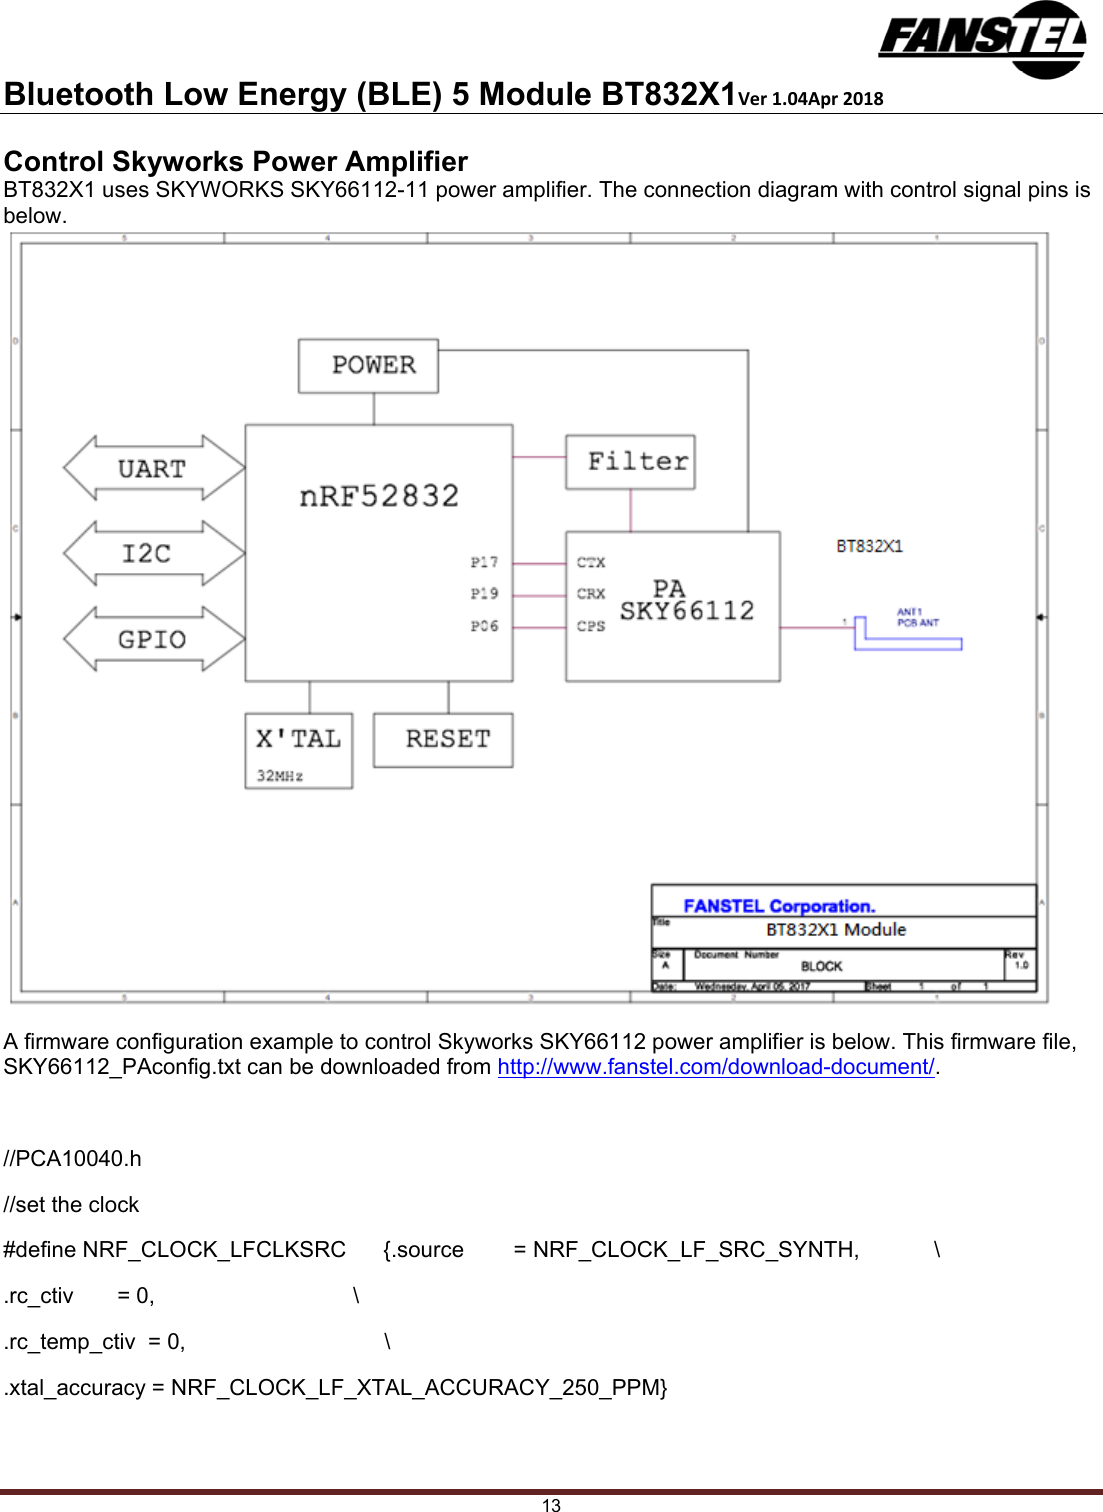 Bluetooth Low Energy (BLE) 5 Module BT832X1Ver1.04Apr2018 13 Control Skyworks Power Amplifier BT832X1 uses SKYWORKS SKY66112-11 power amplifier. The connection diagram with control signal pins is below. A firmware configuration example to control Skyworks SKY66112 power amplifier is below. This firmware file, SKY66112_PAconfig.txt can be downloaded from http://www.fanstel.com/download-document/.  //PCA10040.h //set the clock  #define NRF_CLOCK_LFCLKSRC      {.source        = NRF_CLOCK_LF_SRC_SYNTH,            \ .rc_ctiv       = 0,                                \ .rc_temp_ctiv  = 0,                                \ .xtal_accuracy = NRF_CLOCK_LF_XTAL_ACCURACY_250_PPM}  